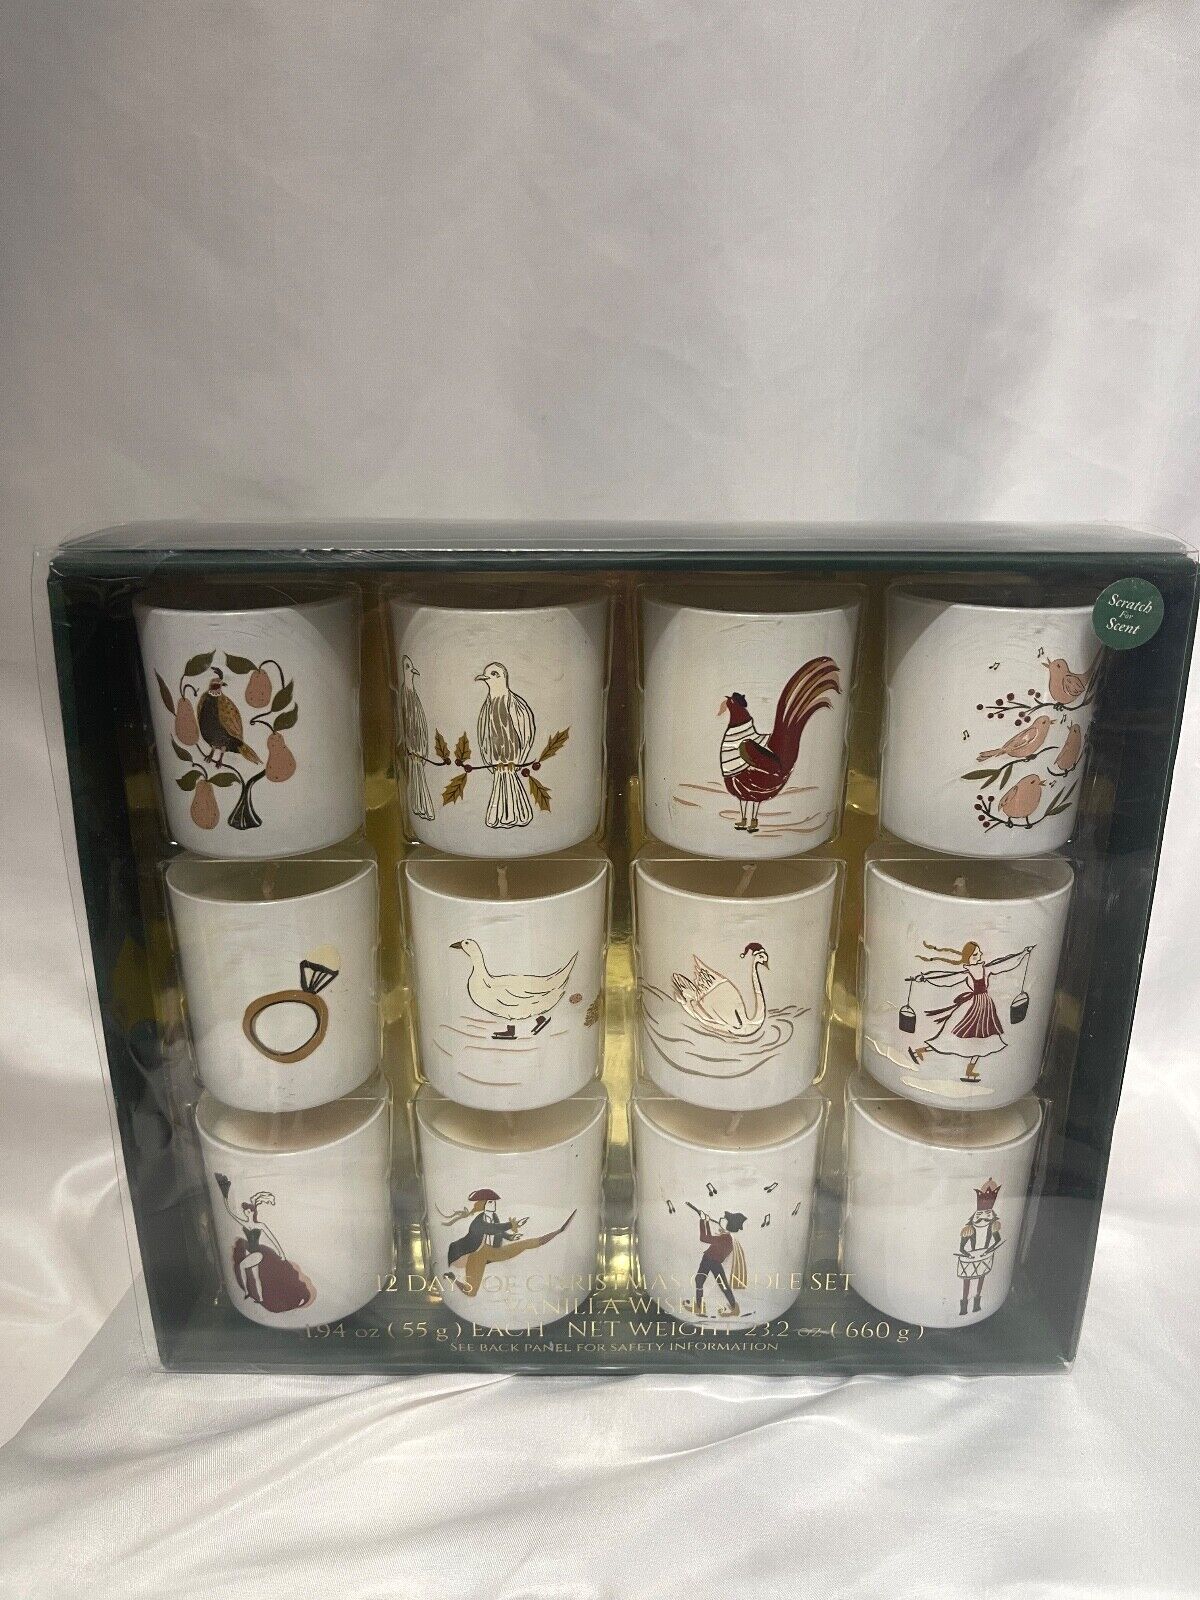 12 Days Of Christmas Scented Candle Gift Set Holiday Scent Vanilla Wishes New